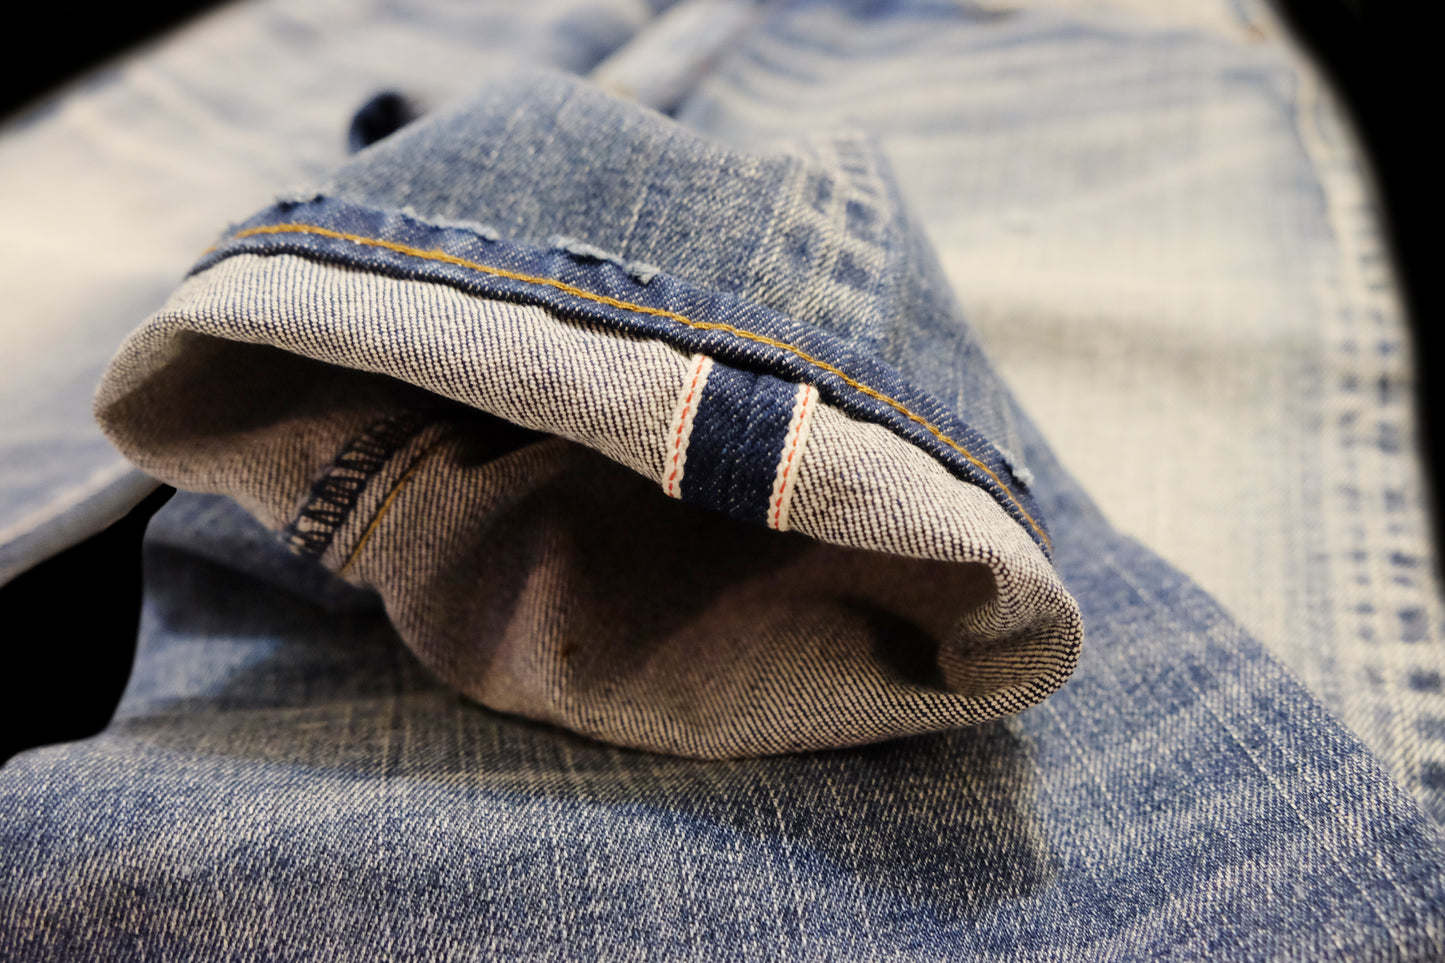 FL5 Washed Jeans Series【Type B】